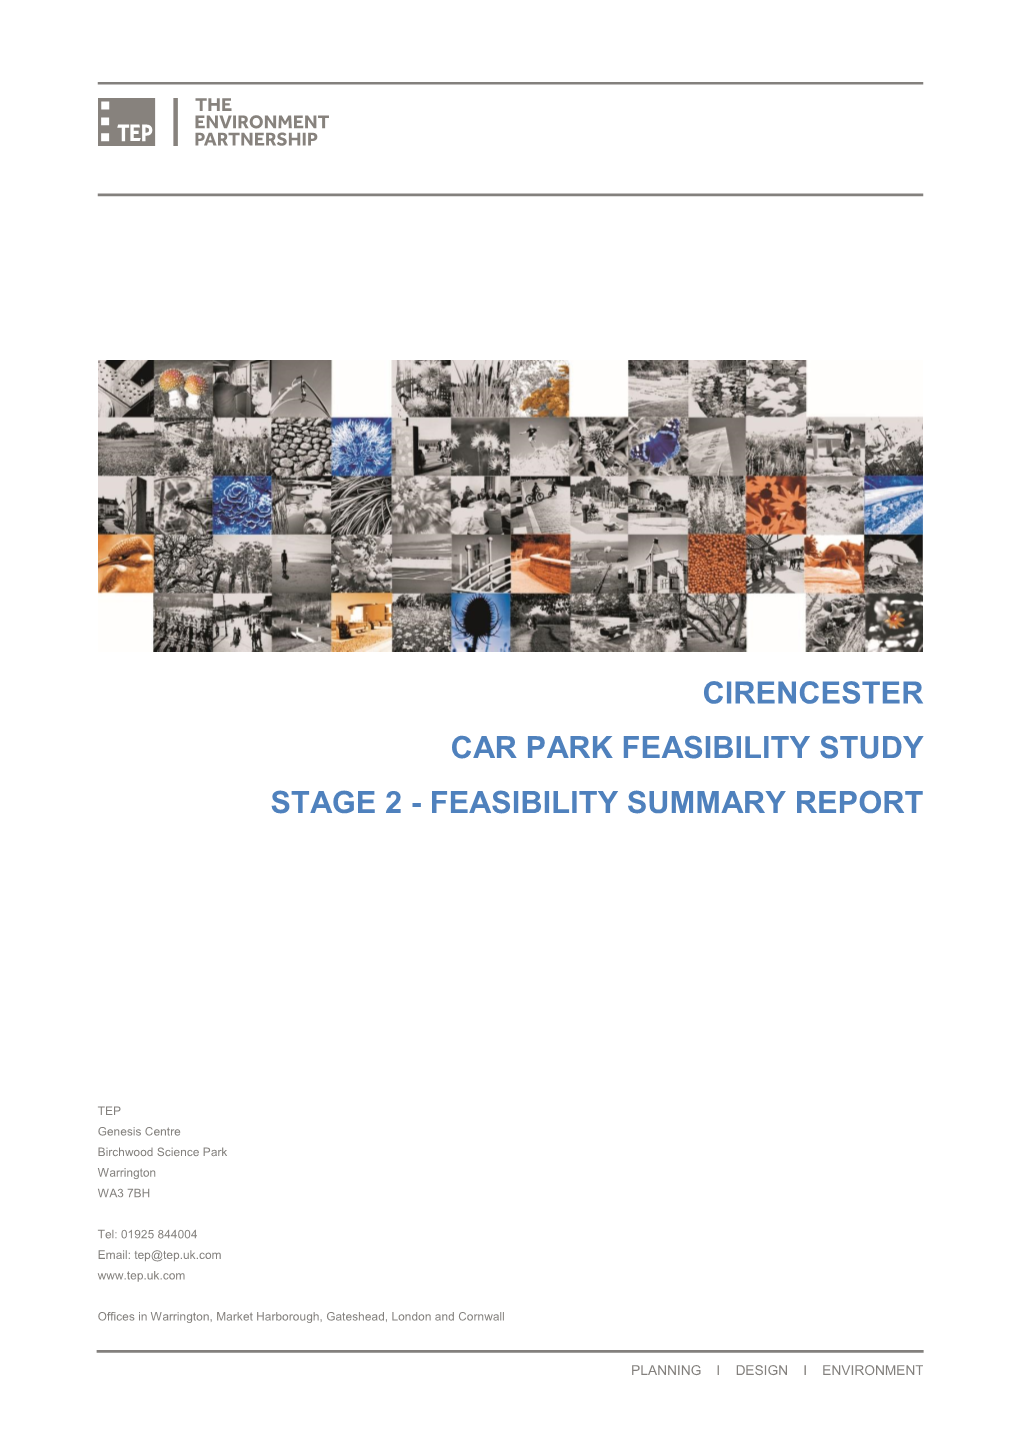 Cirencester Car Park Feasibility Study Stage 2 Report